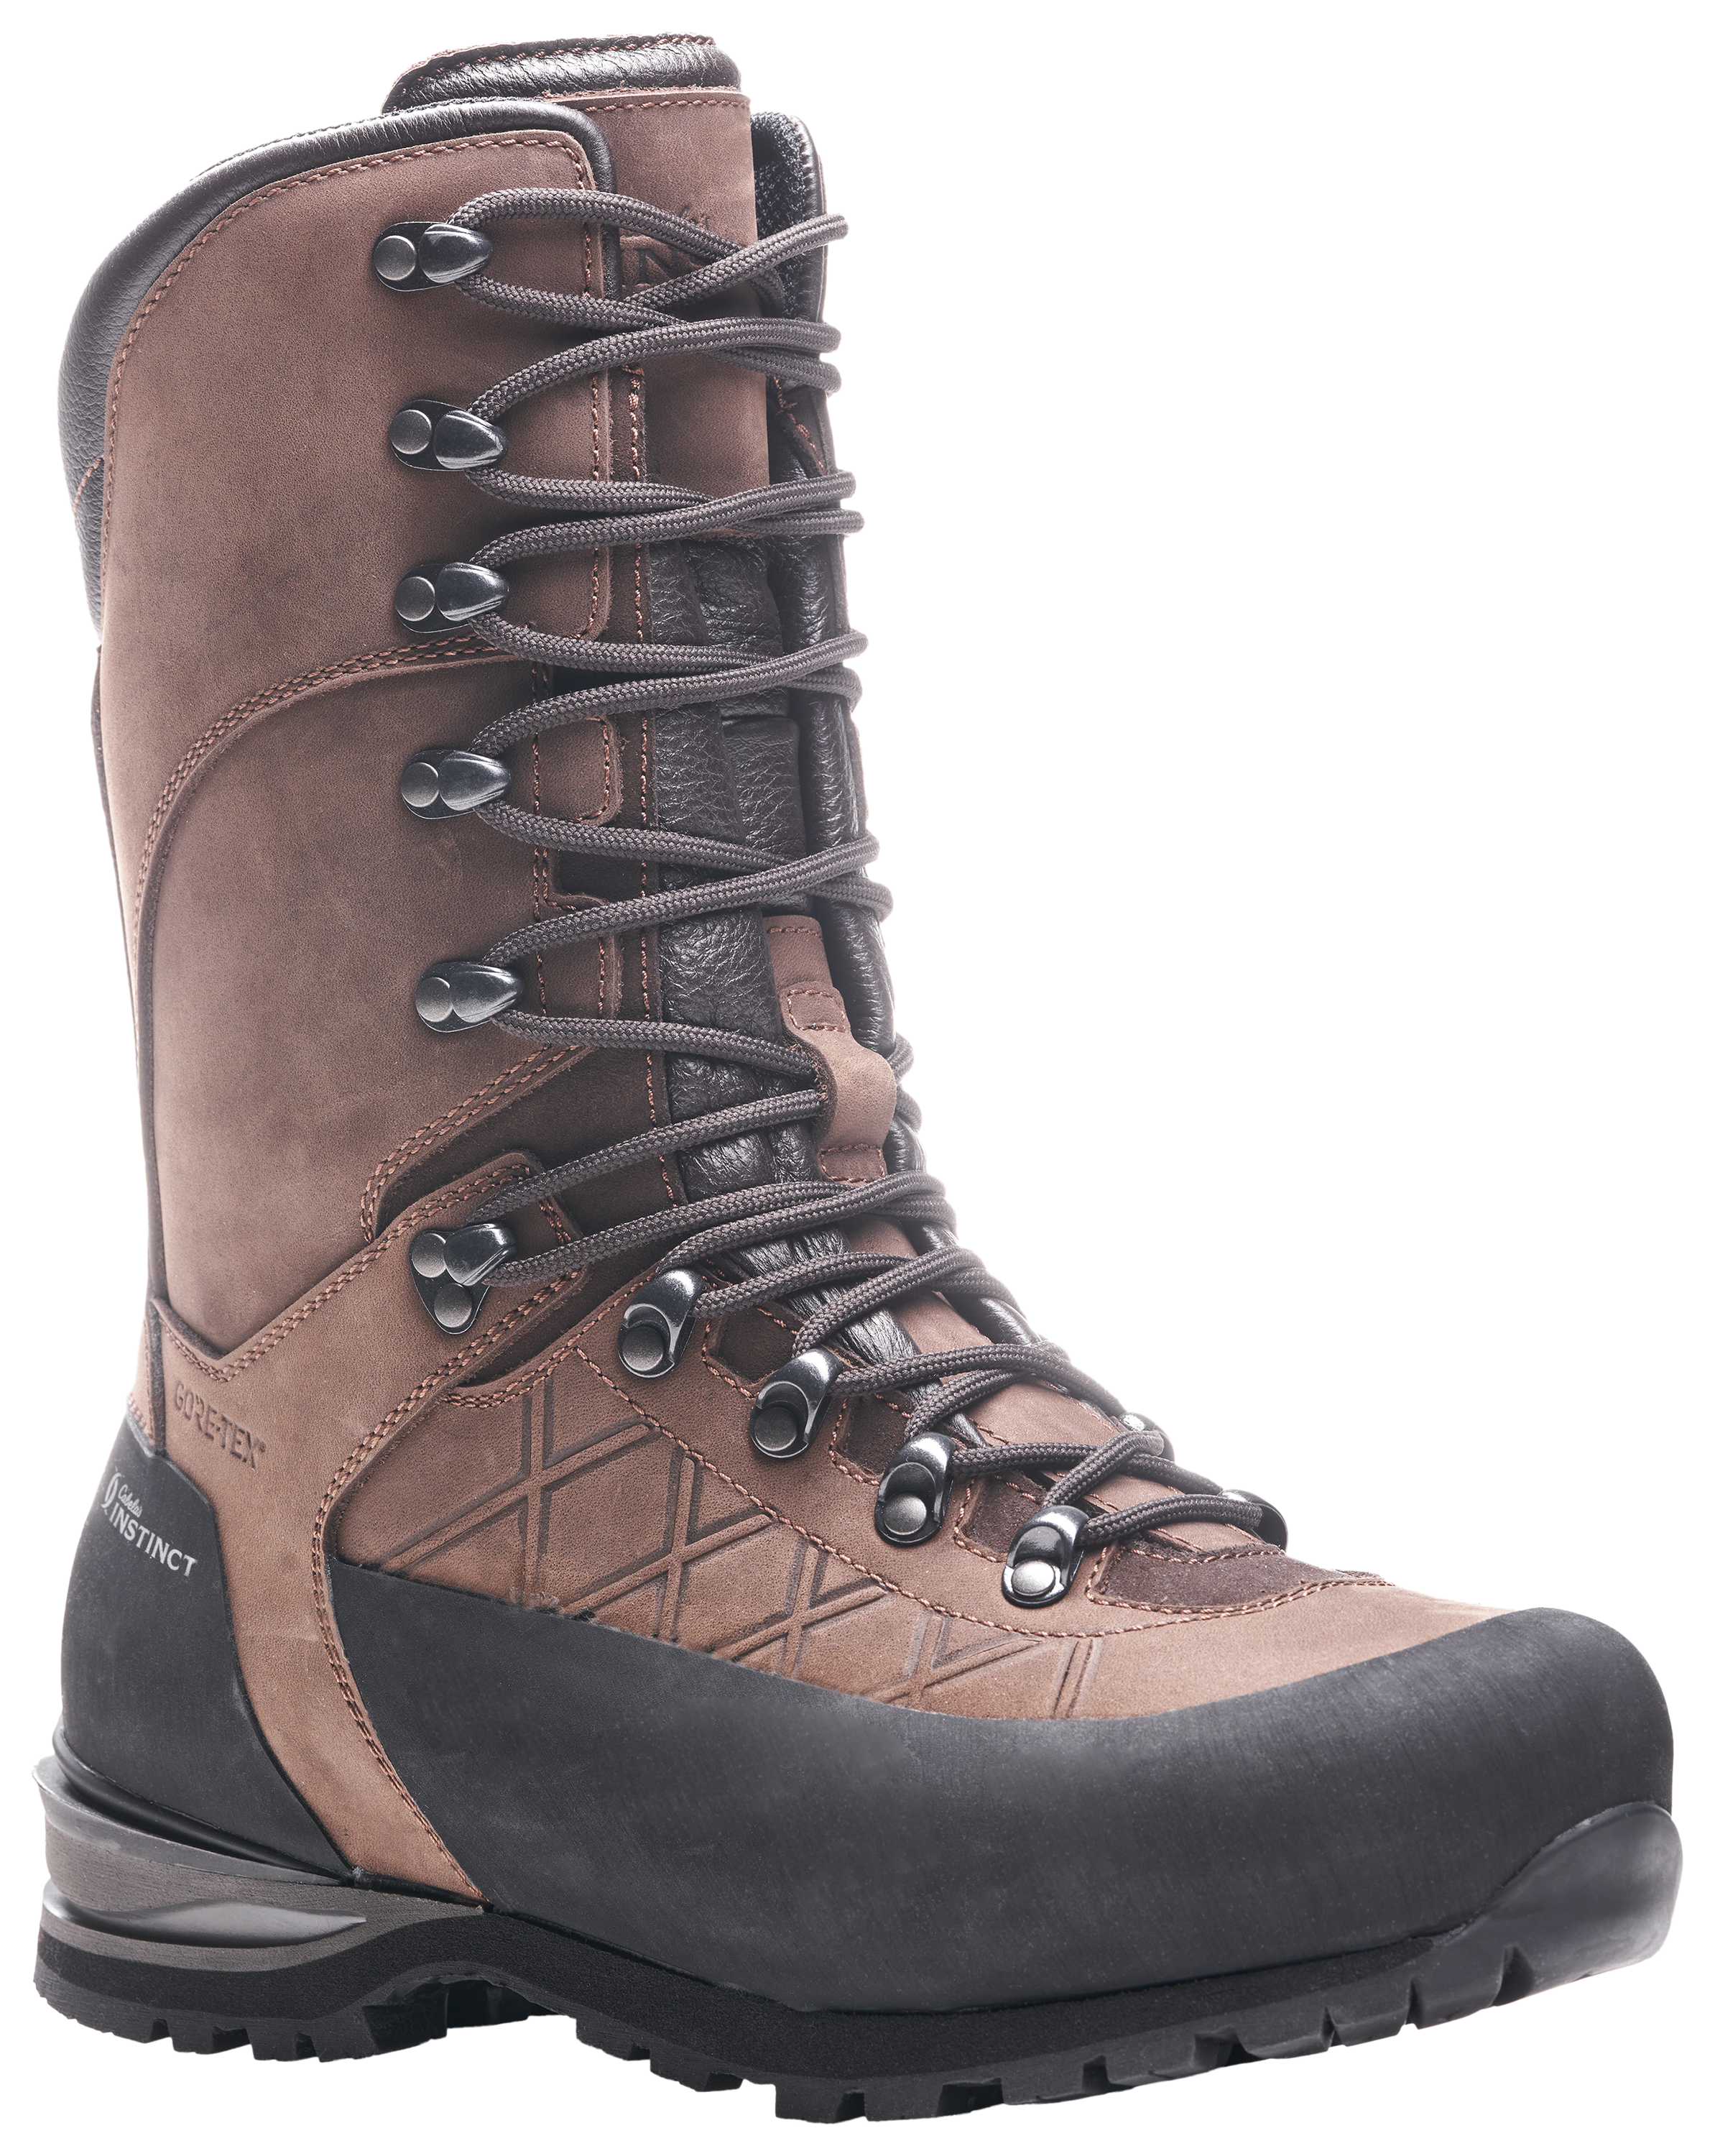 Cabela's Instinct Mountain Thermal 600 GORE-TEX Insulated Hunting Boots for Men